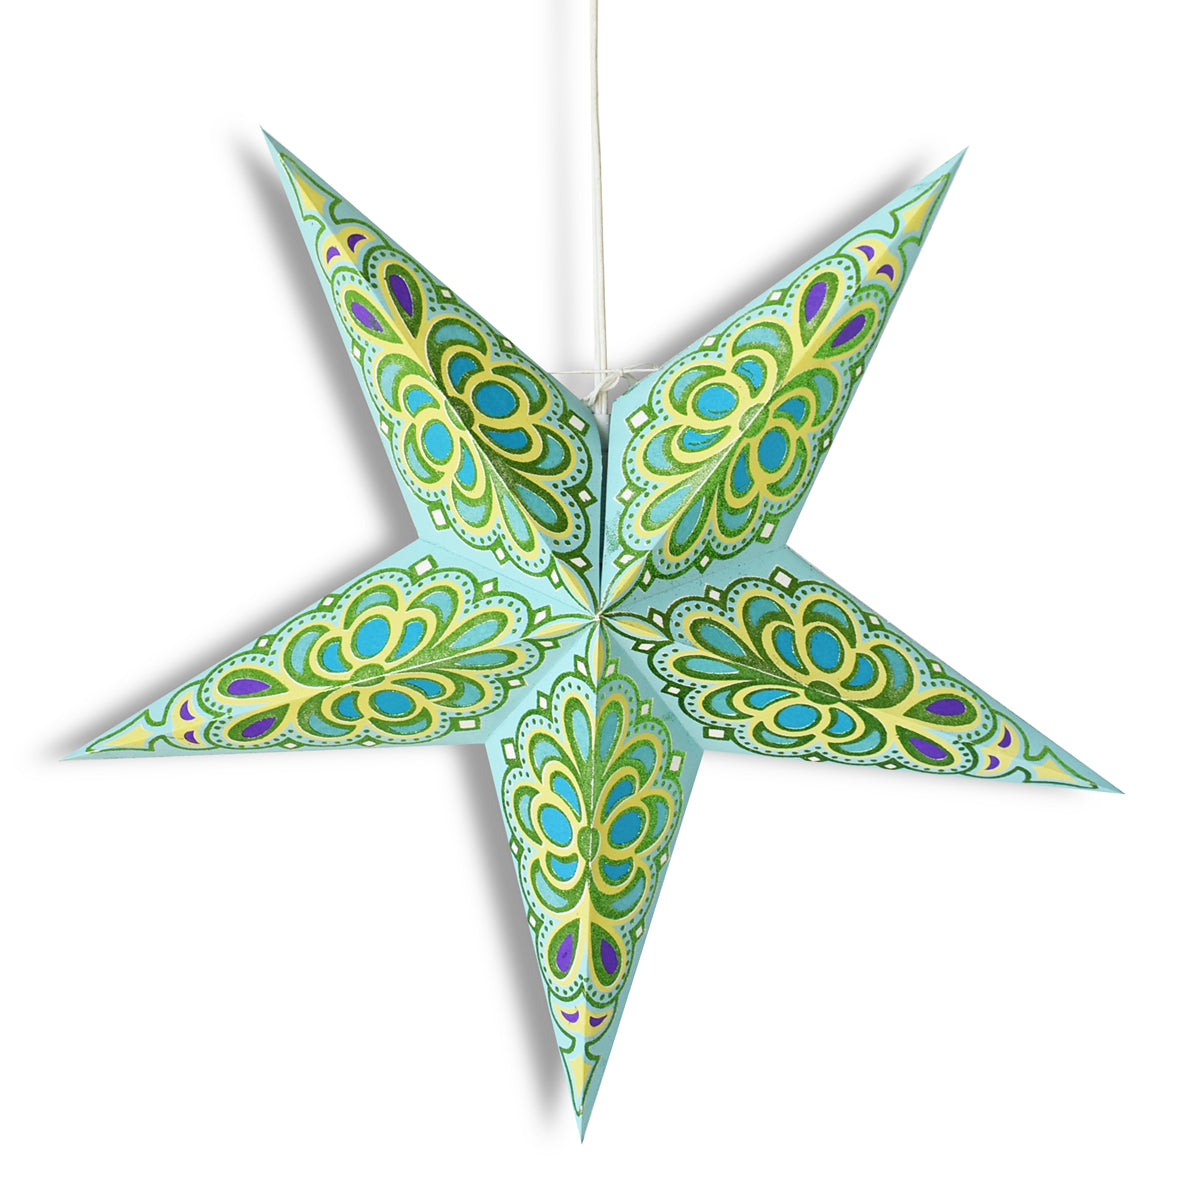 24" Green / Turquoise Merry Gold Glitter Paper Star Lantern, Chinese Hanging Wedding & Party Decoration - PaperLanternStore.com - Paper Lanterns, Decor, Party Lights & More